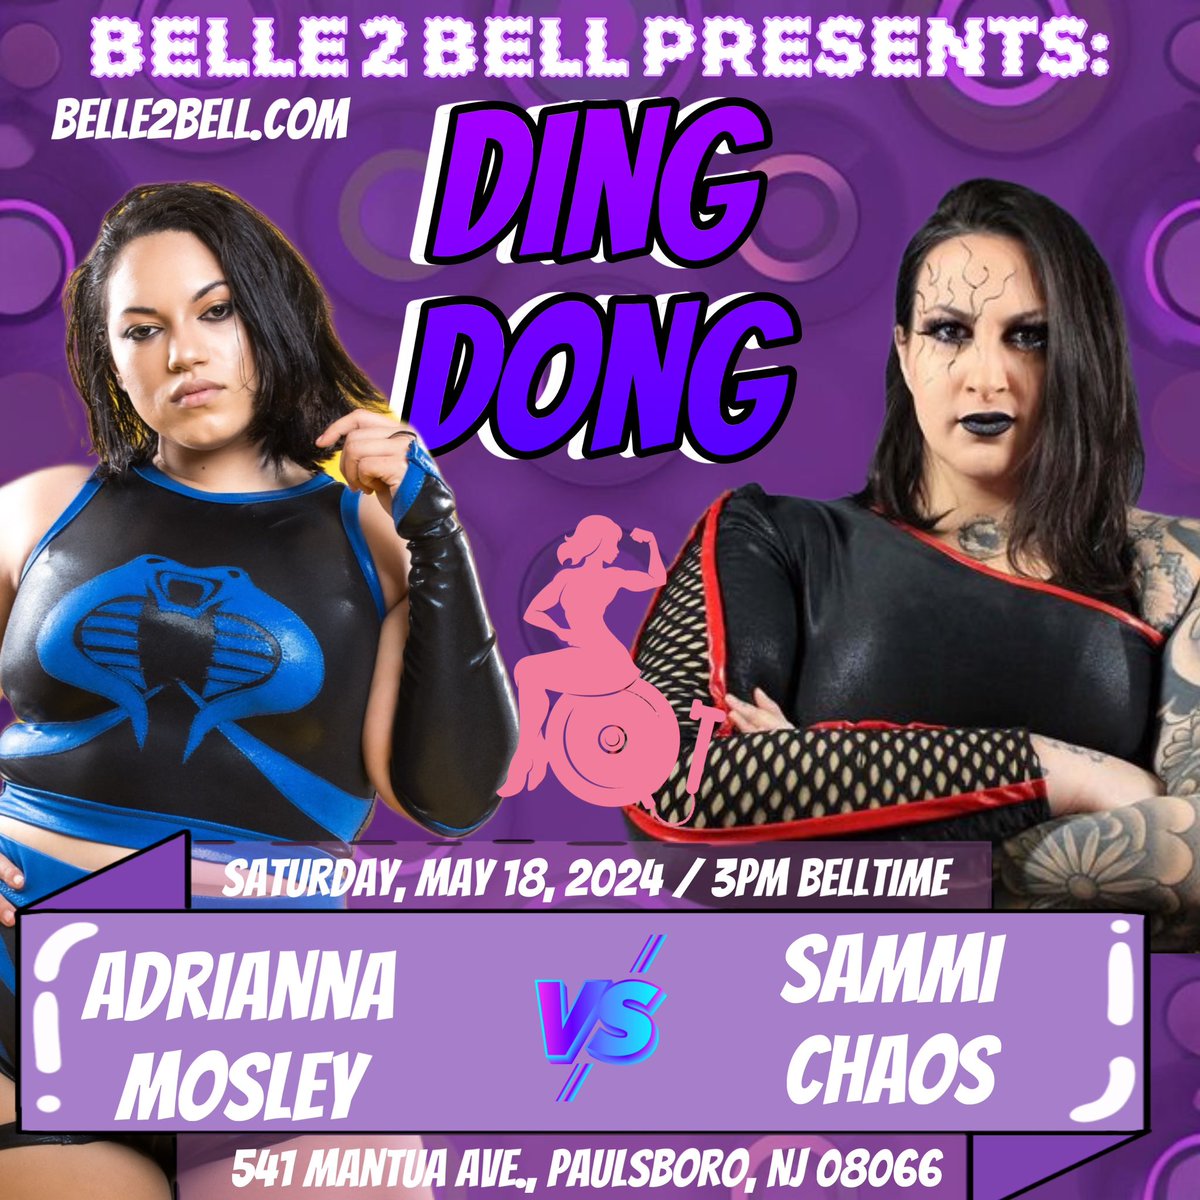 What happens when you let two bulls run head first into each other? I don’t know either but we will find out May 18th when Adrianna Mosely takes on Sammi Chaos! Tickets available at Belle2Bell.com! @realSammiChaos